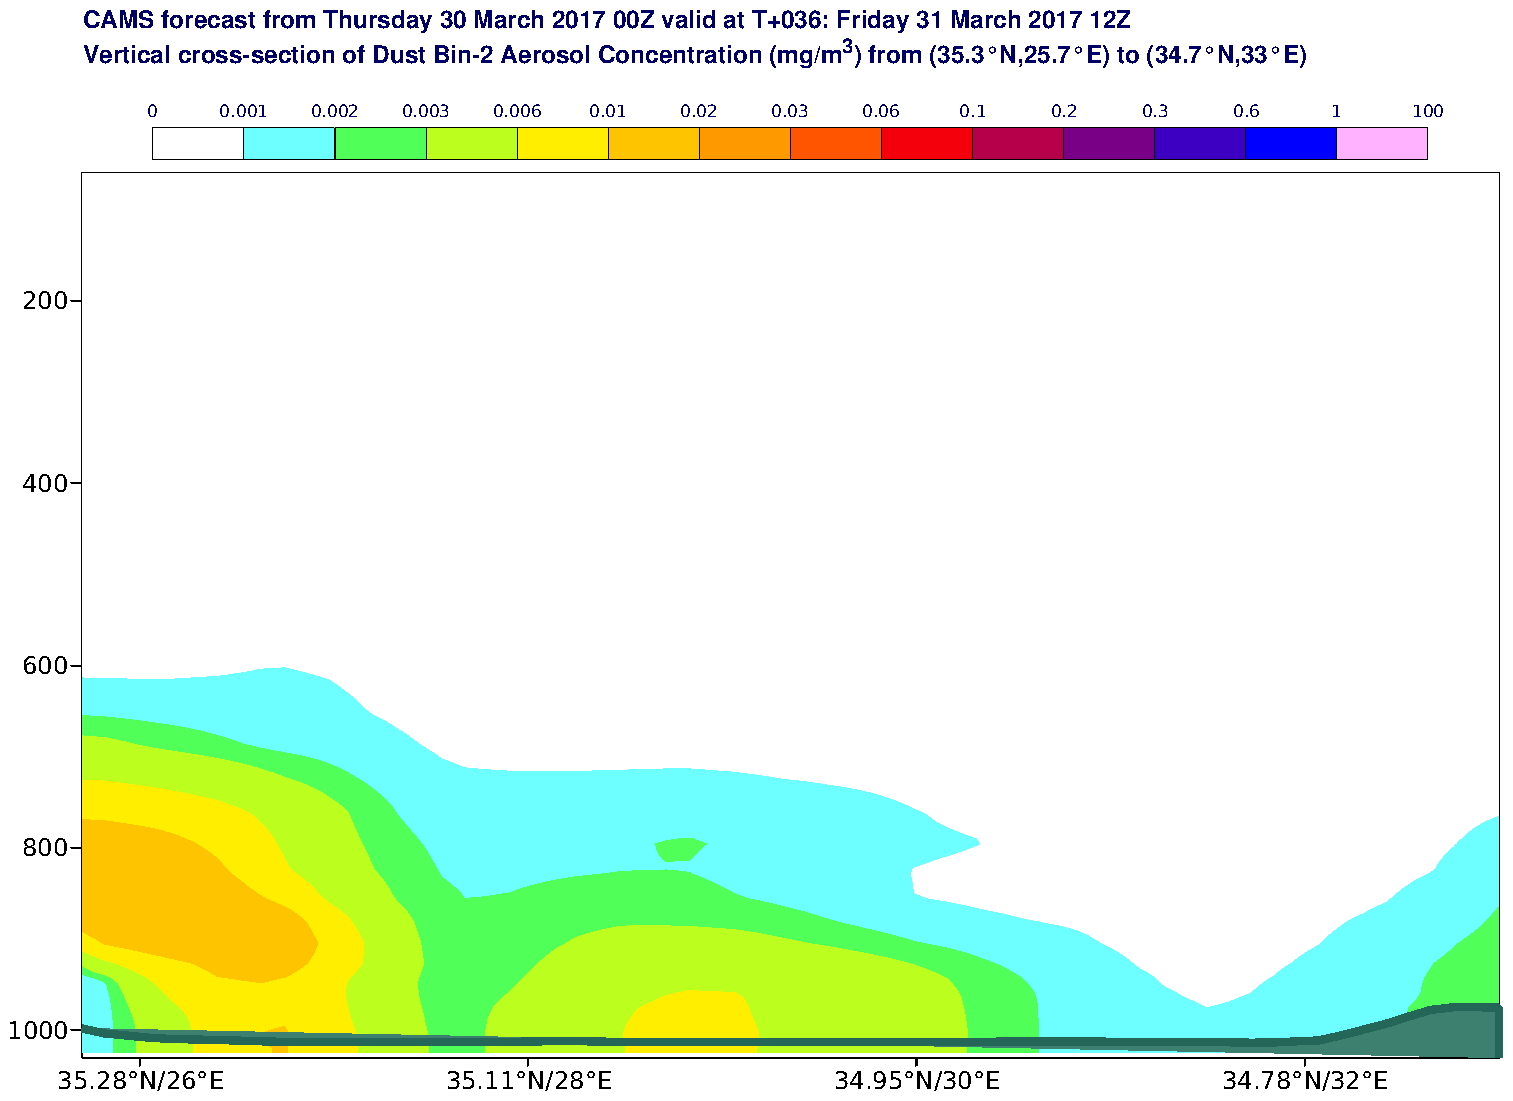 Vertical cross-section of Dust Bin-2 Aerosol Concentration (mg/m3) valid at T36 - 2017-03-31 12:00